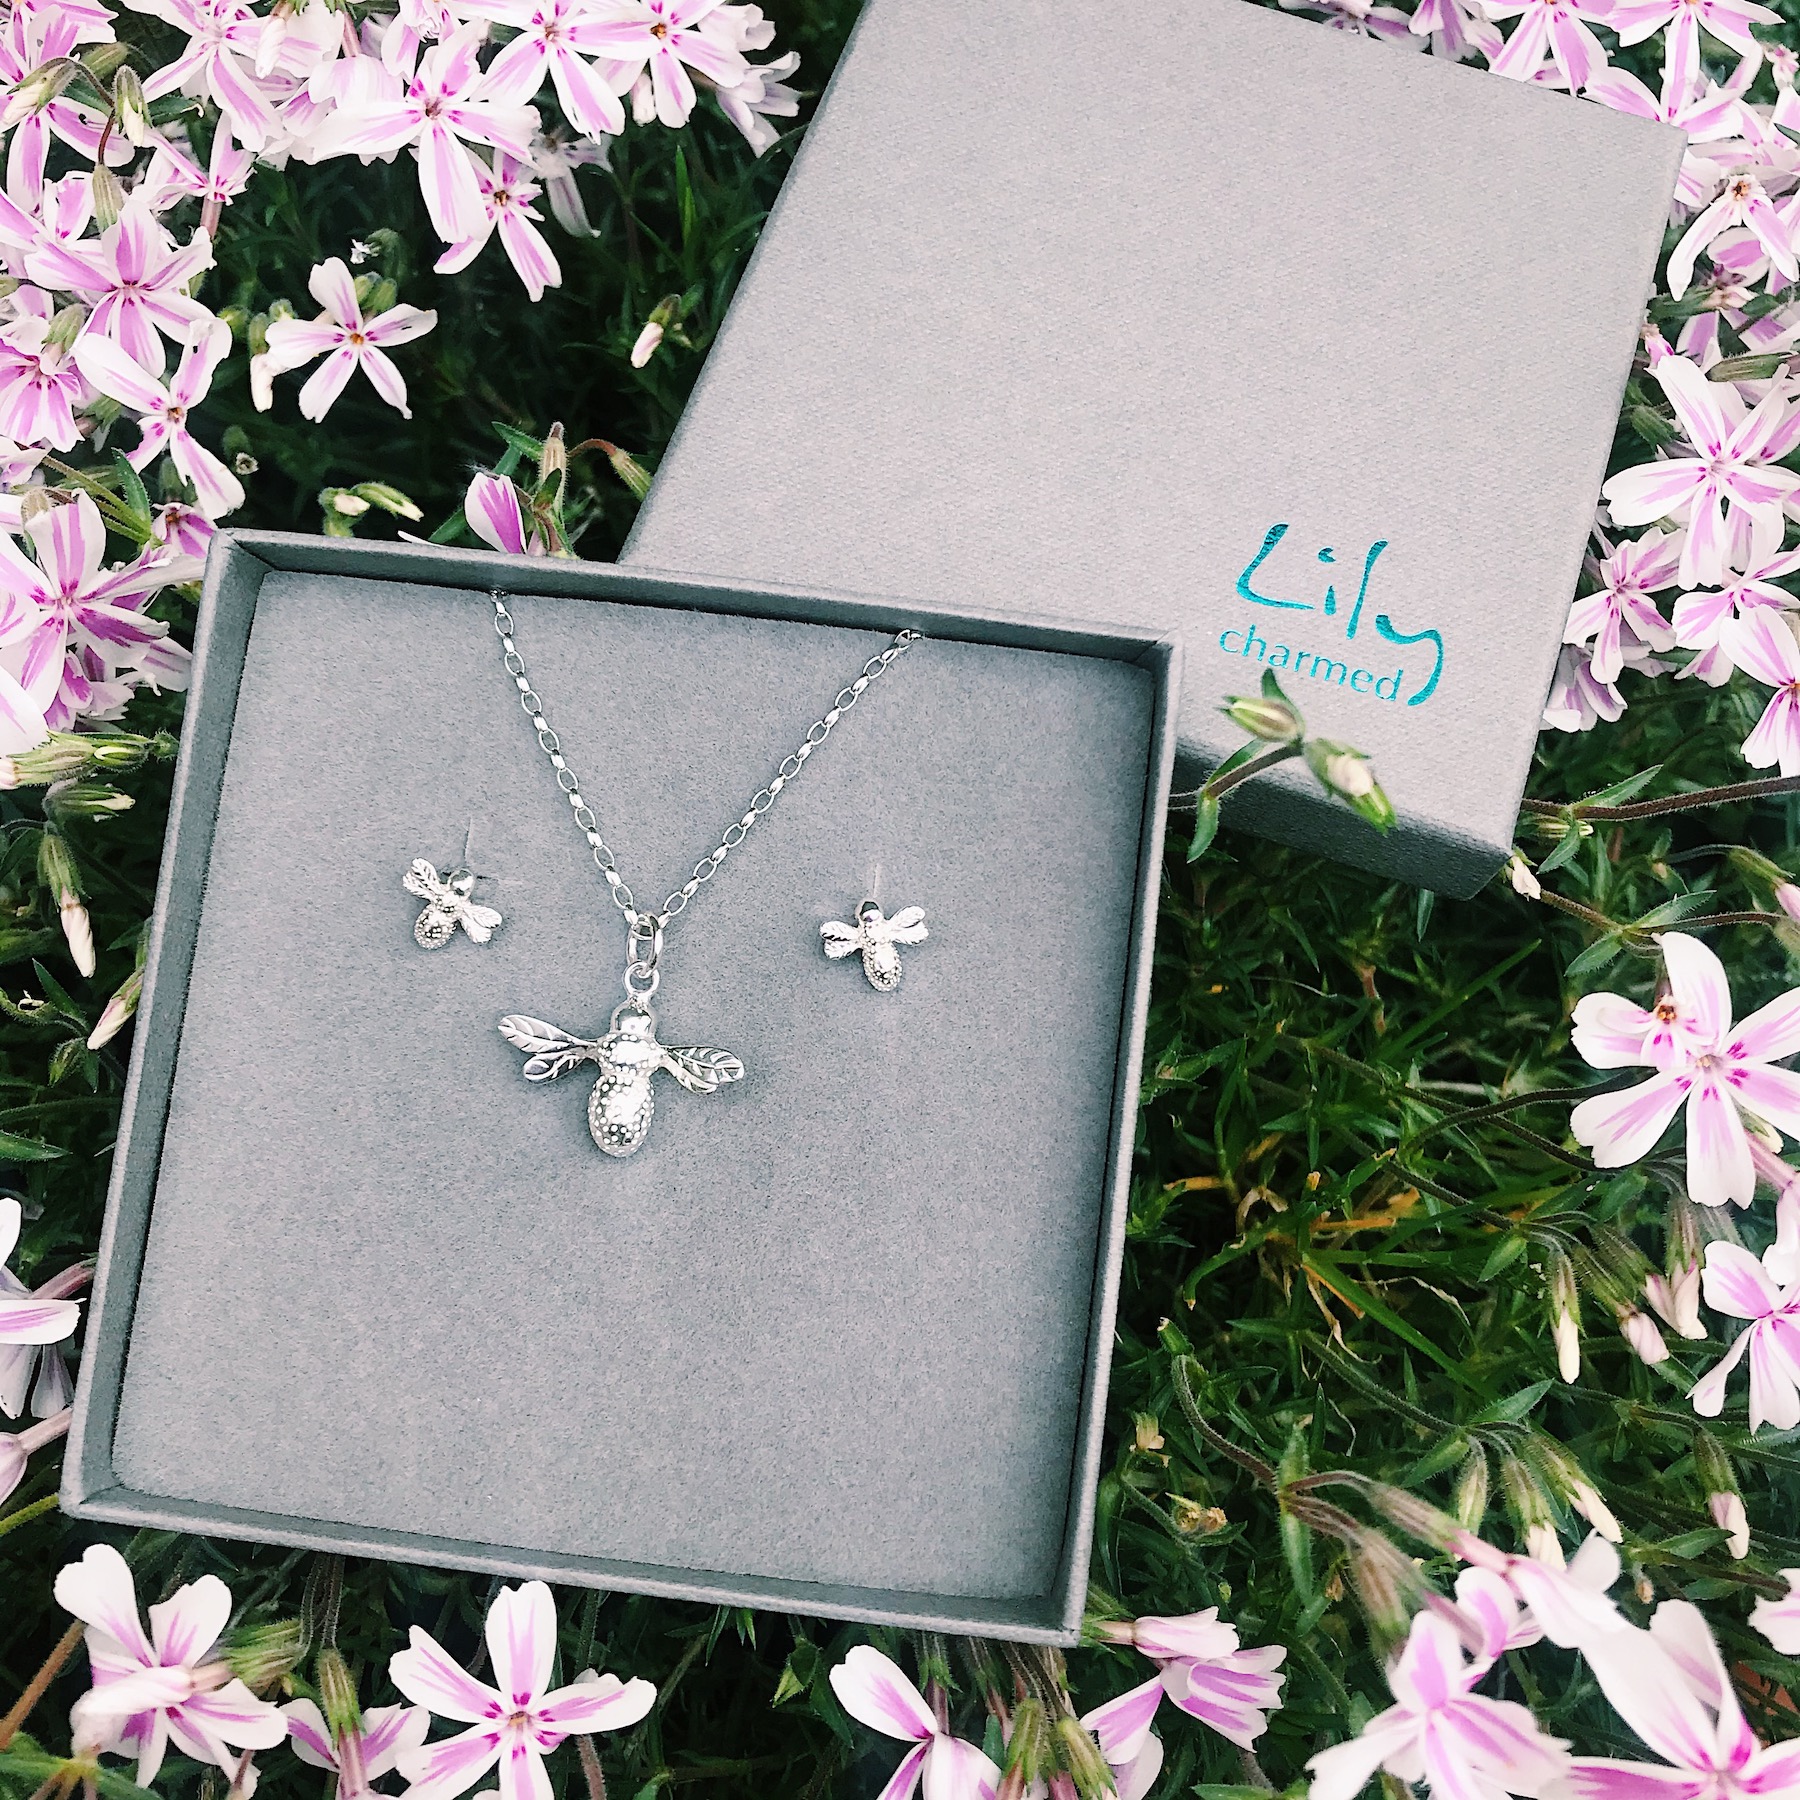 A picture of the Bee Necklace and earrings set from lily Charmed